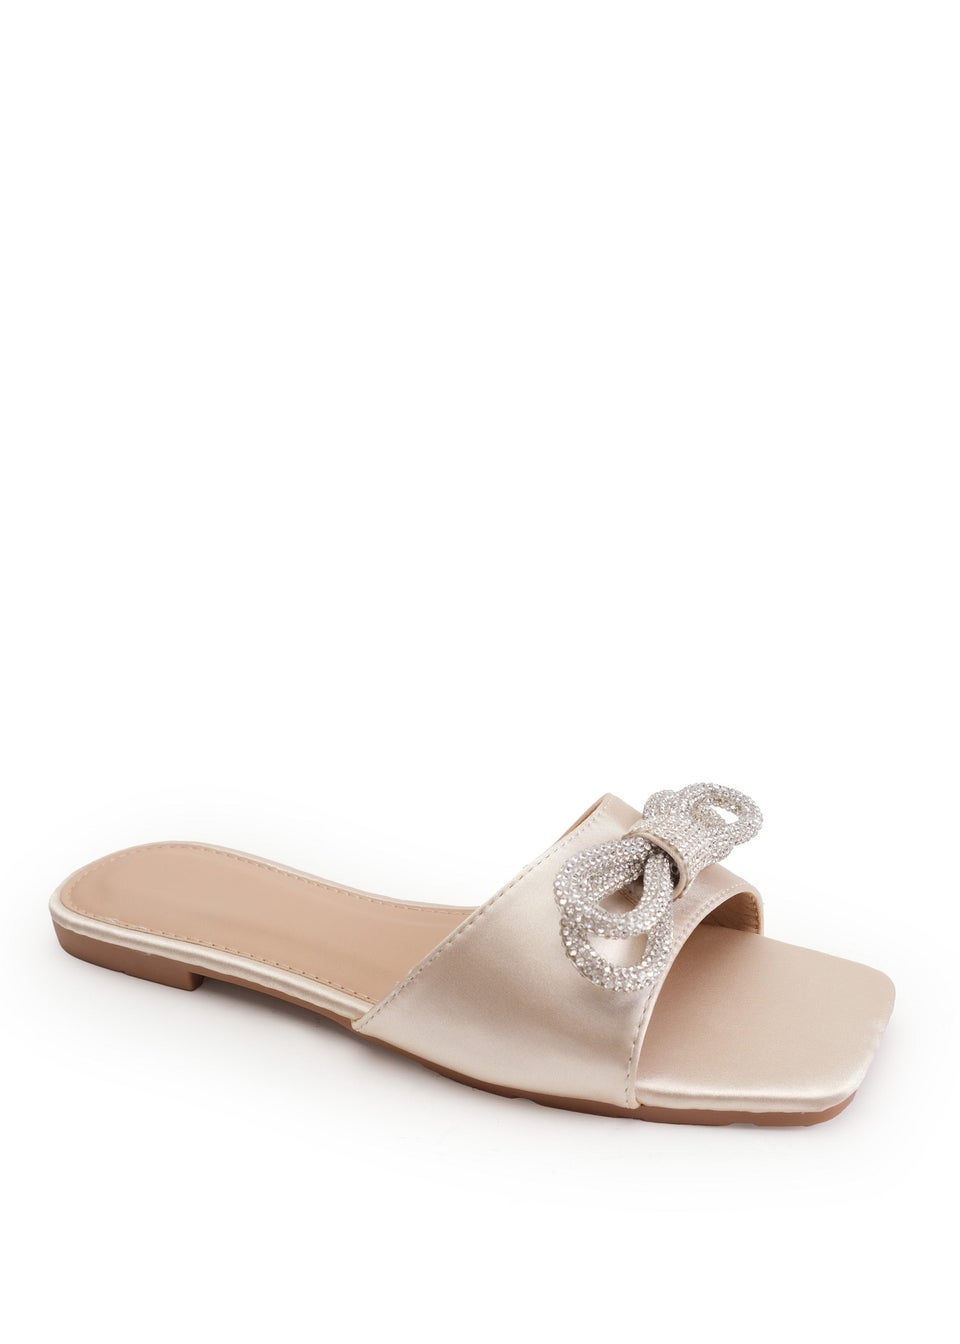 Where's That From Champagne Satin Abril Square Toe Flatform Sliders